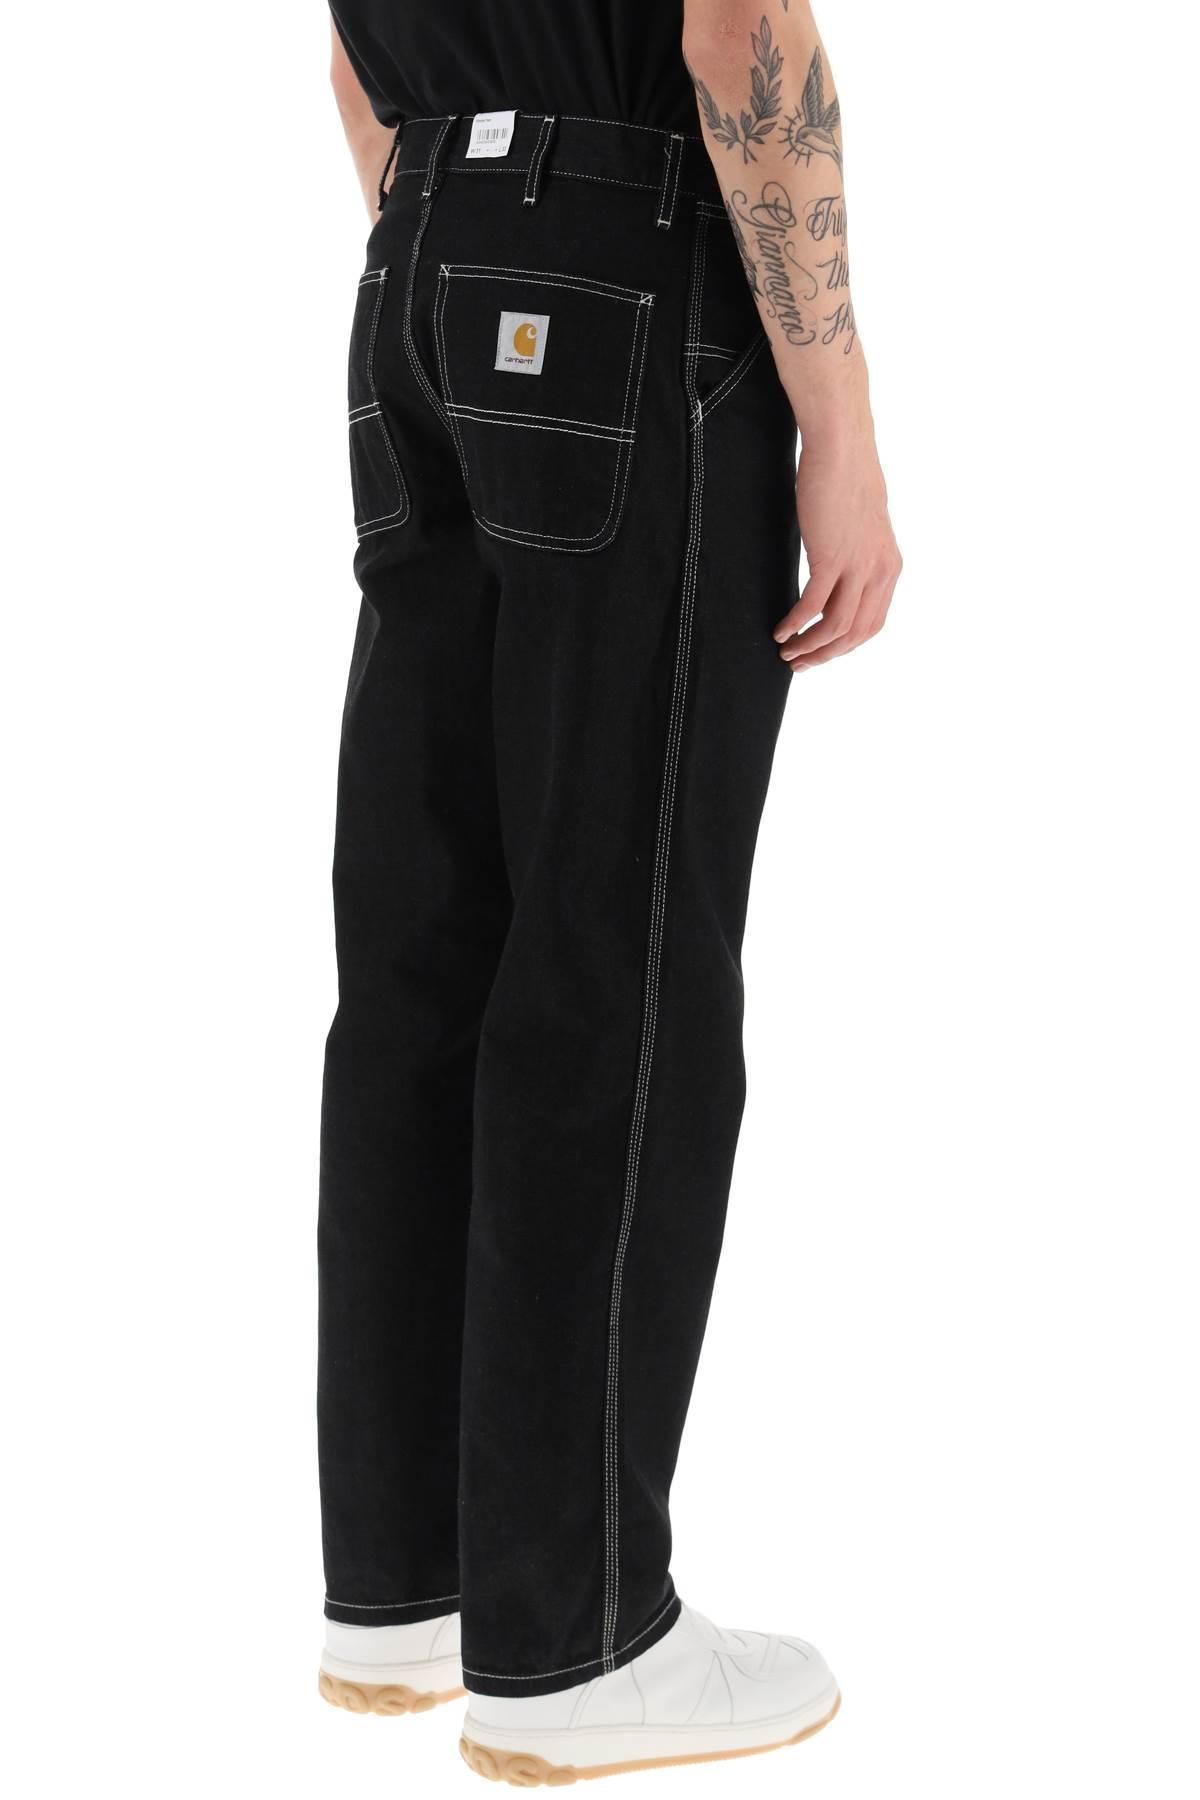 Carhartt Contrasting Topstitching Jeans in Black for Men